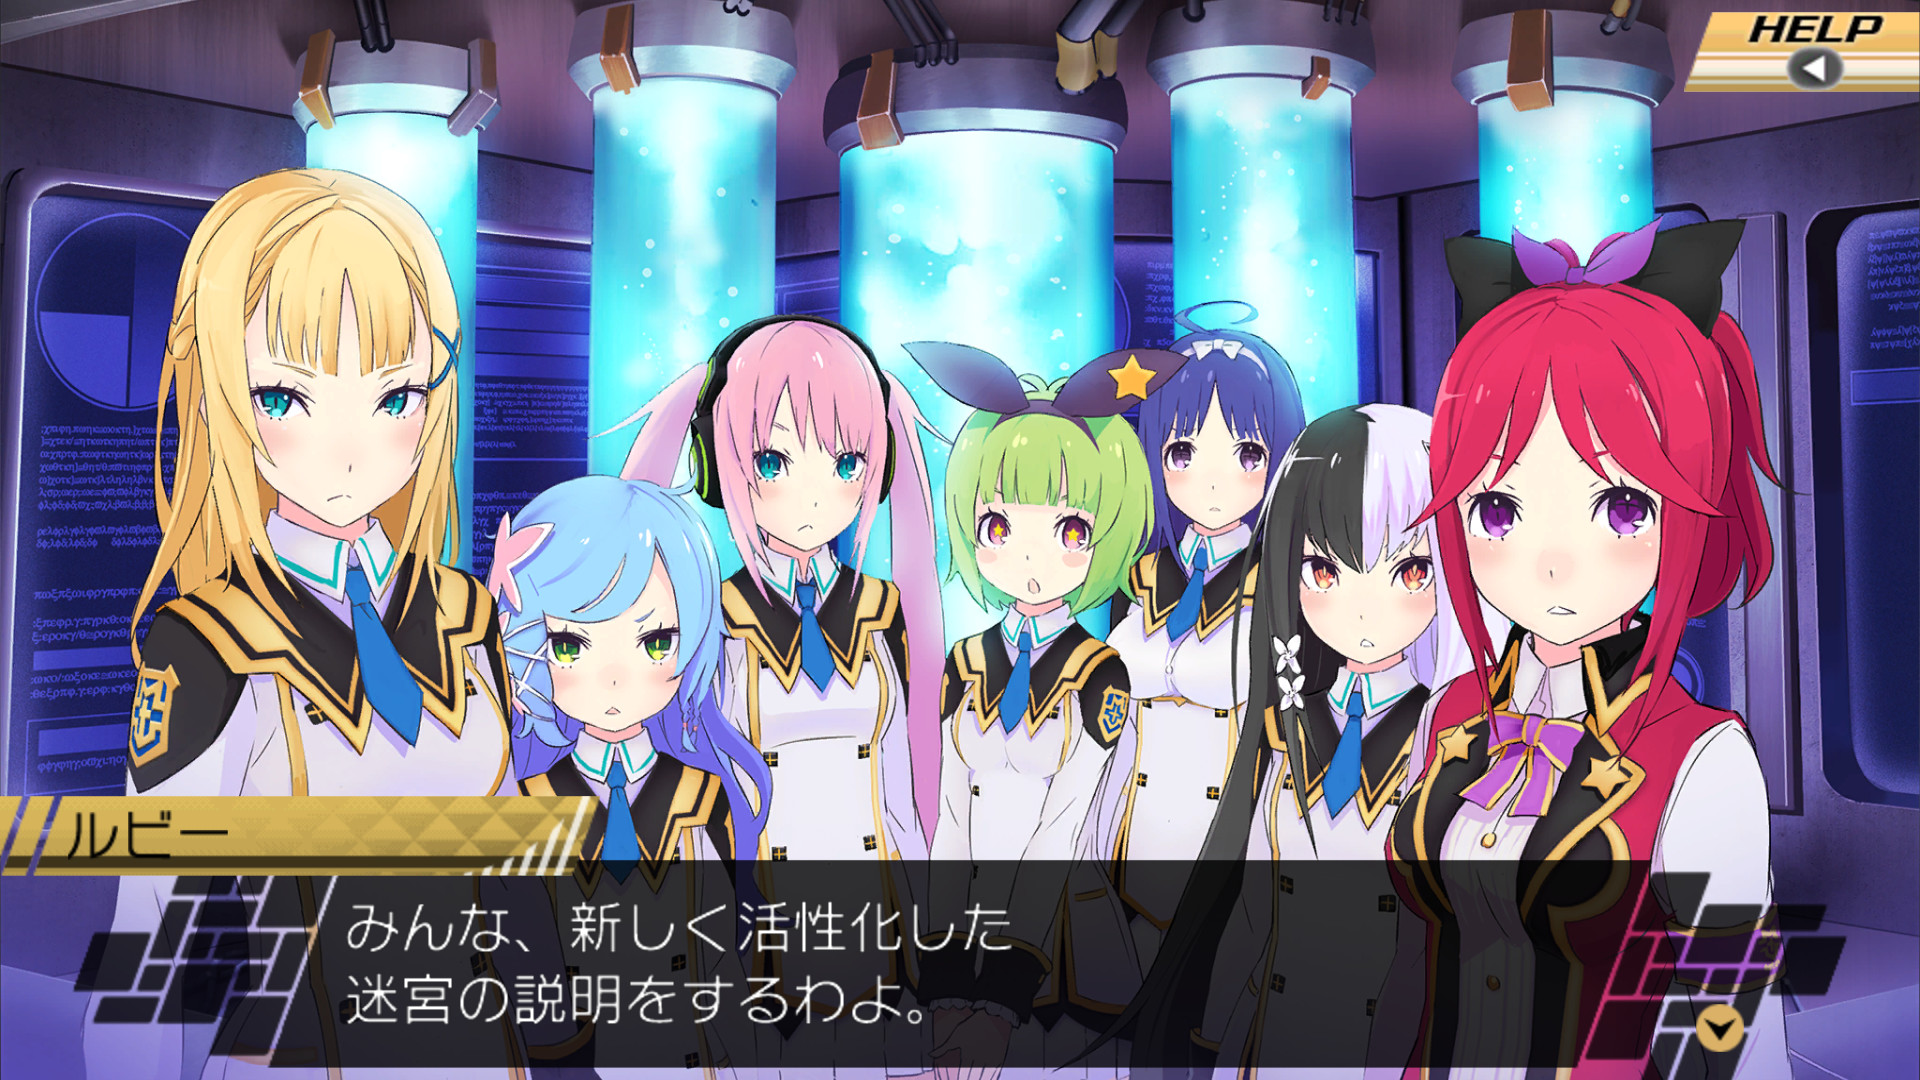 Conception II: Children of the Seven Stars (Game) - Giant Bomb